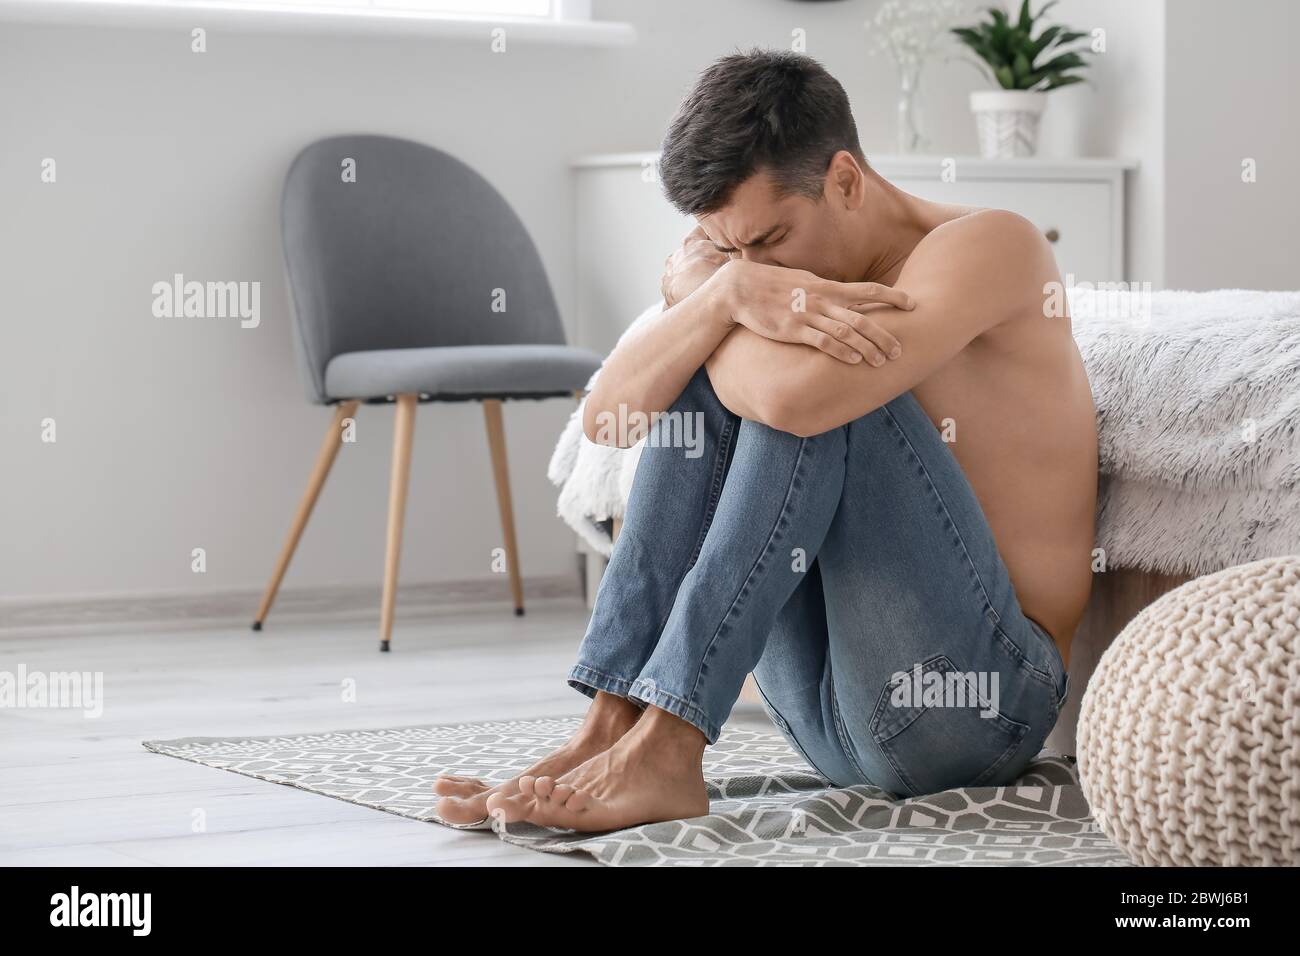 Young man suffering from anorexia at home Stock Photo